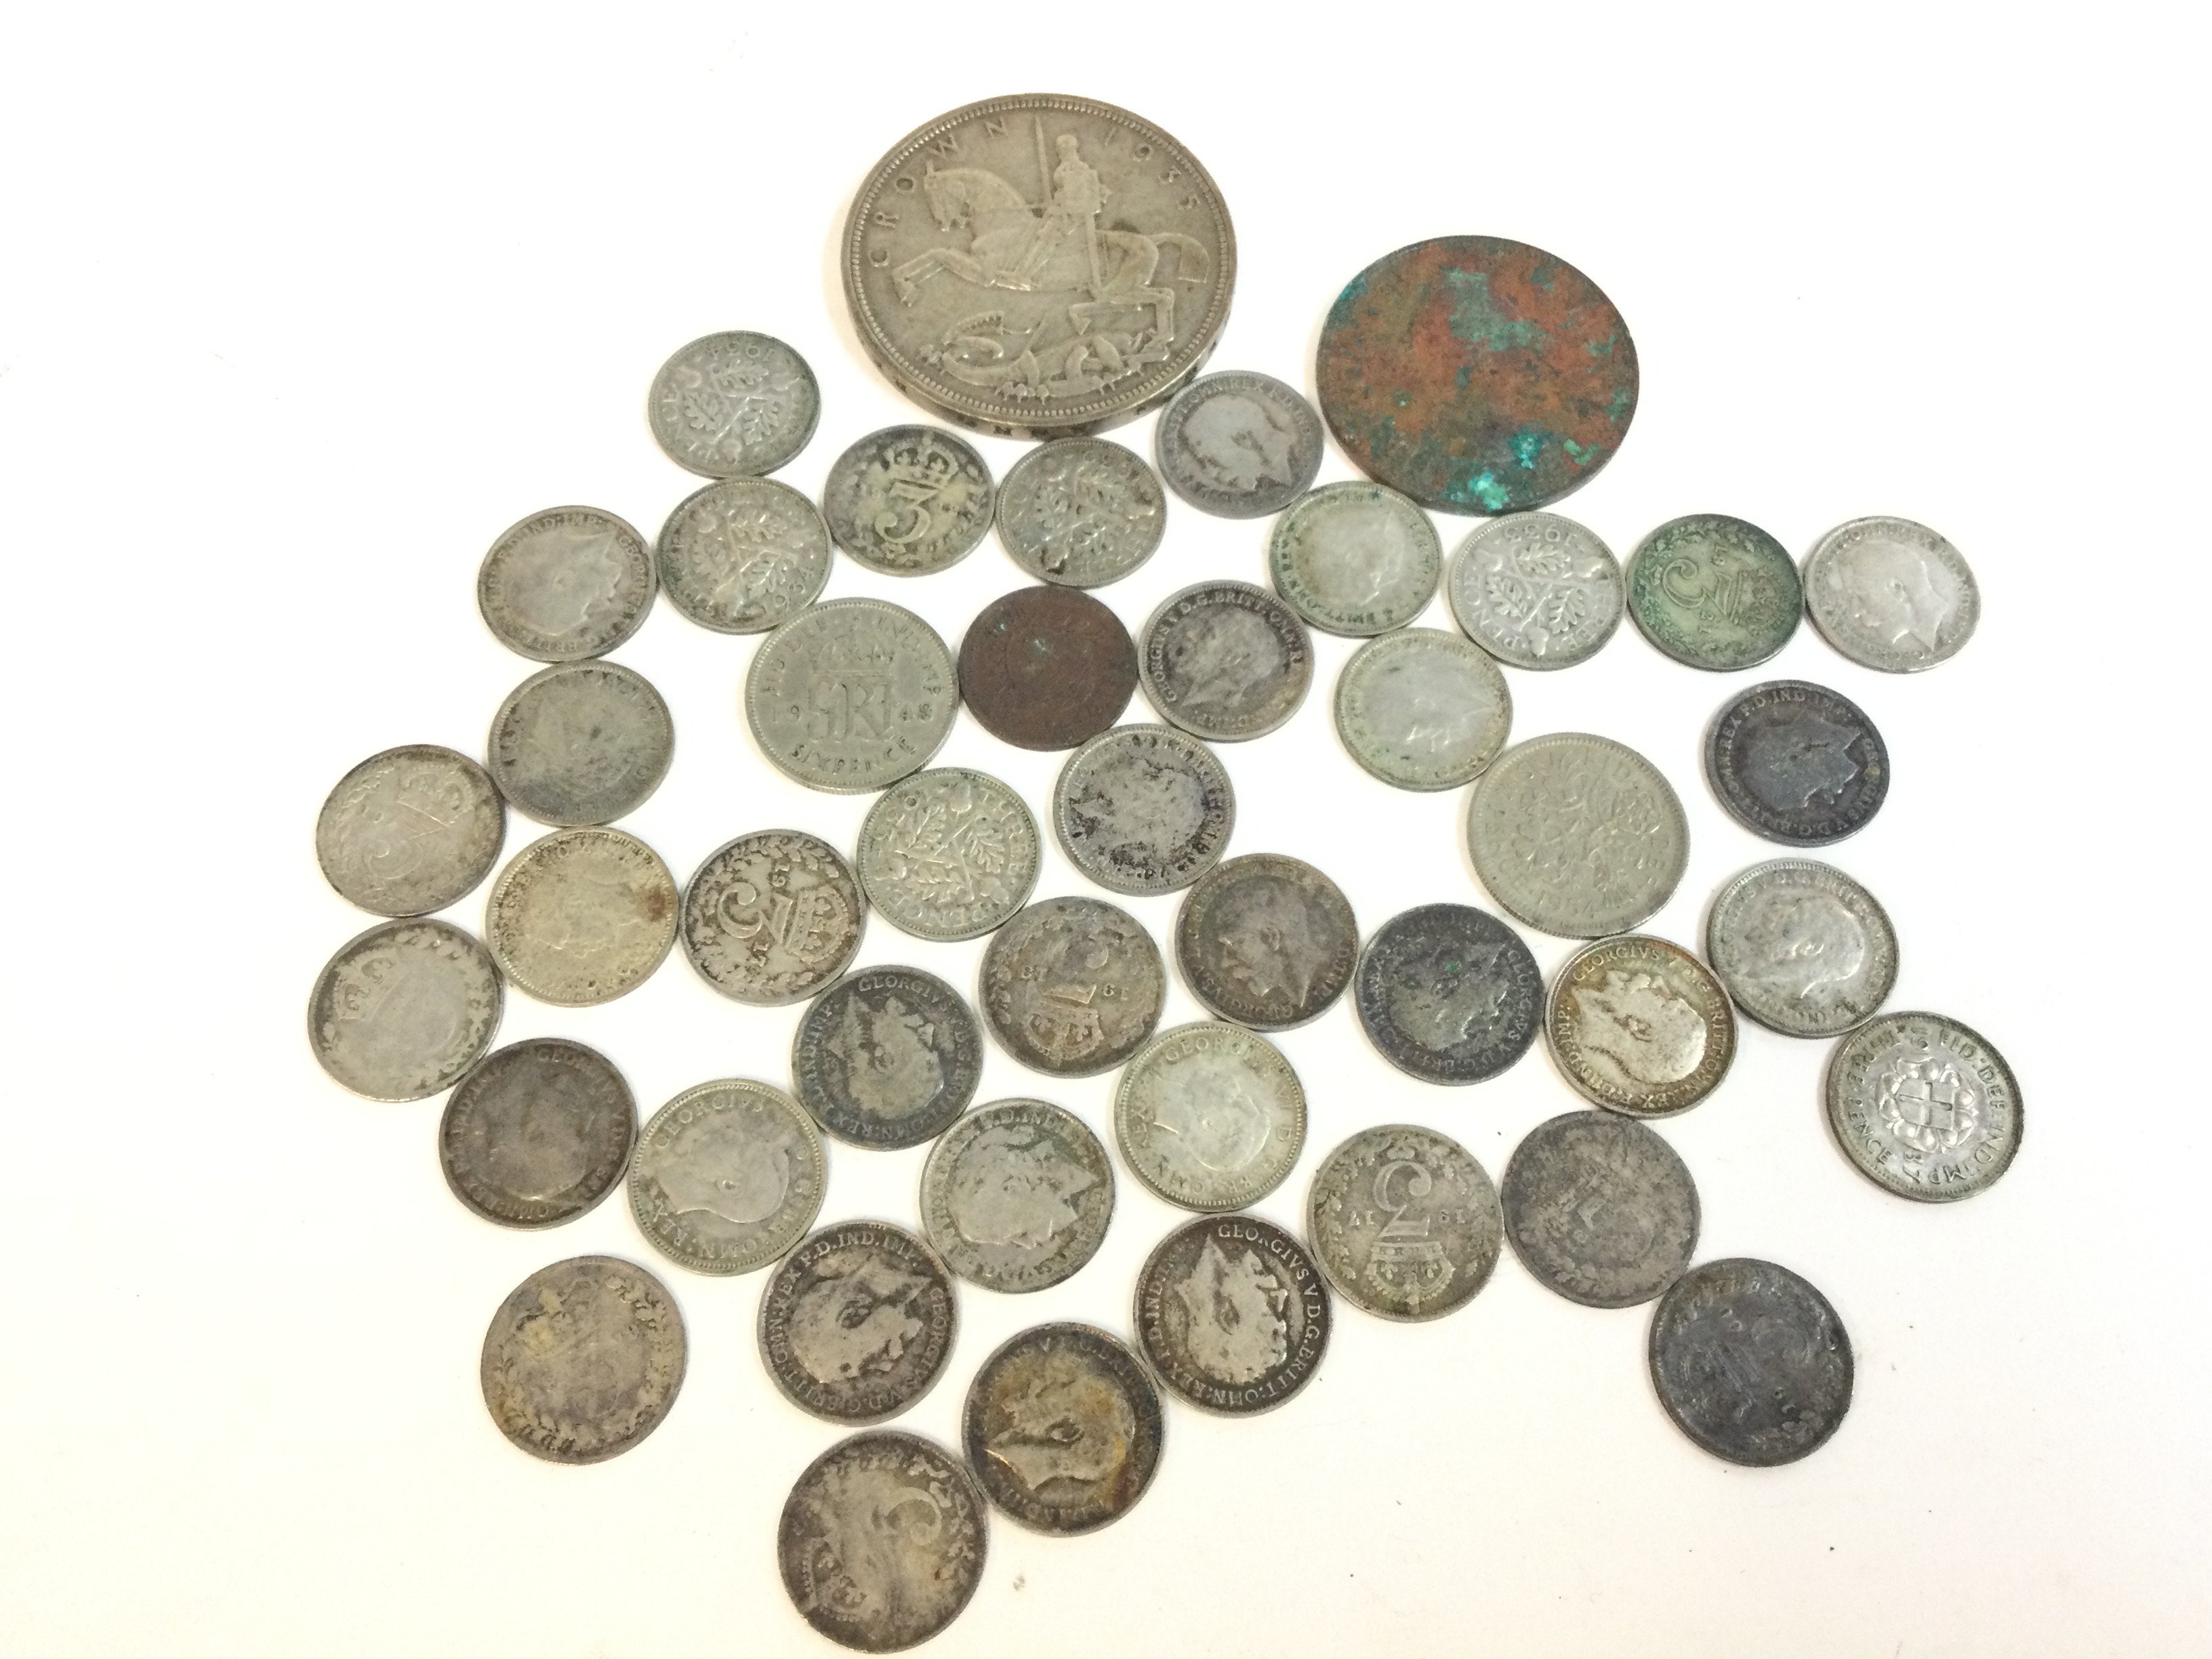 A 1935 crown and other coinage including multiple